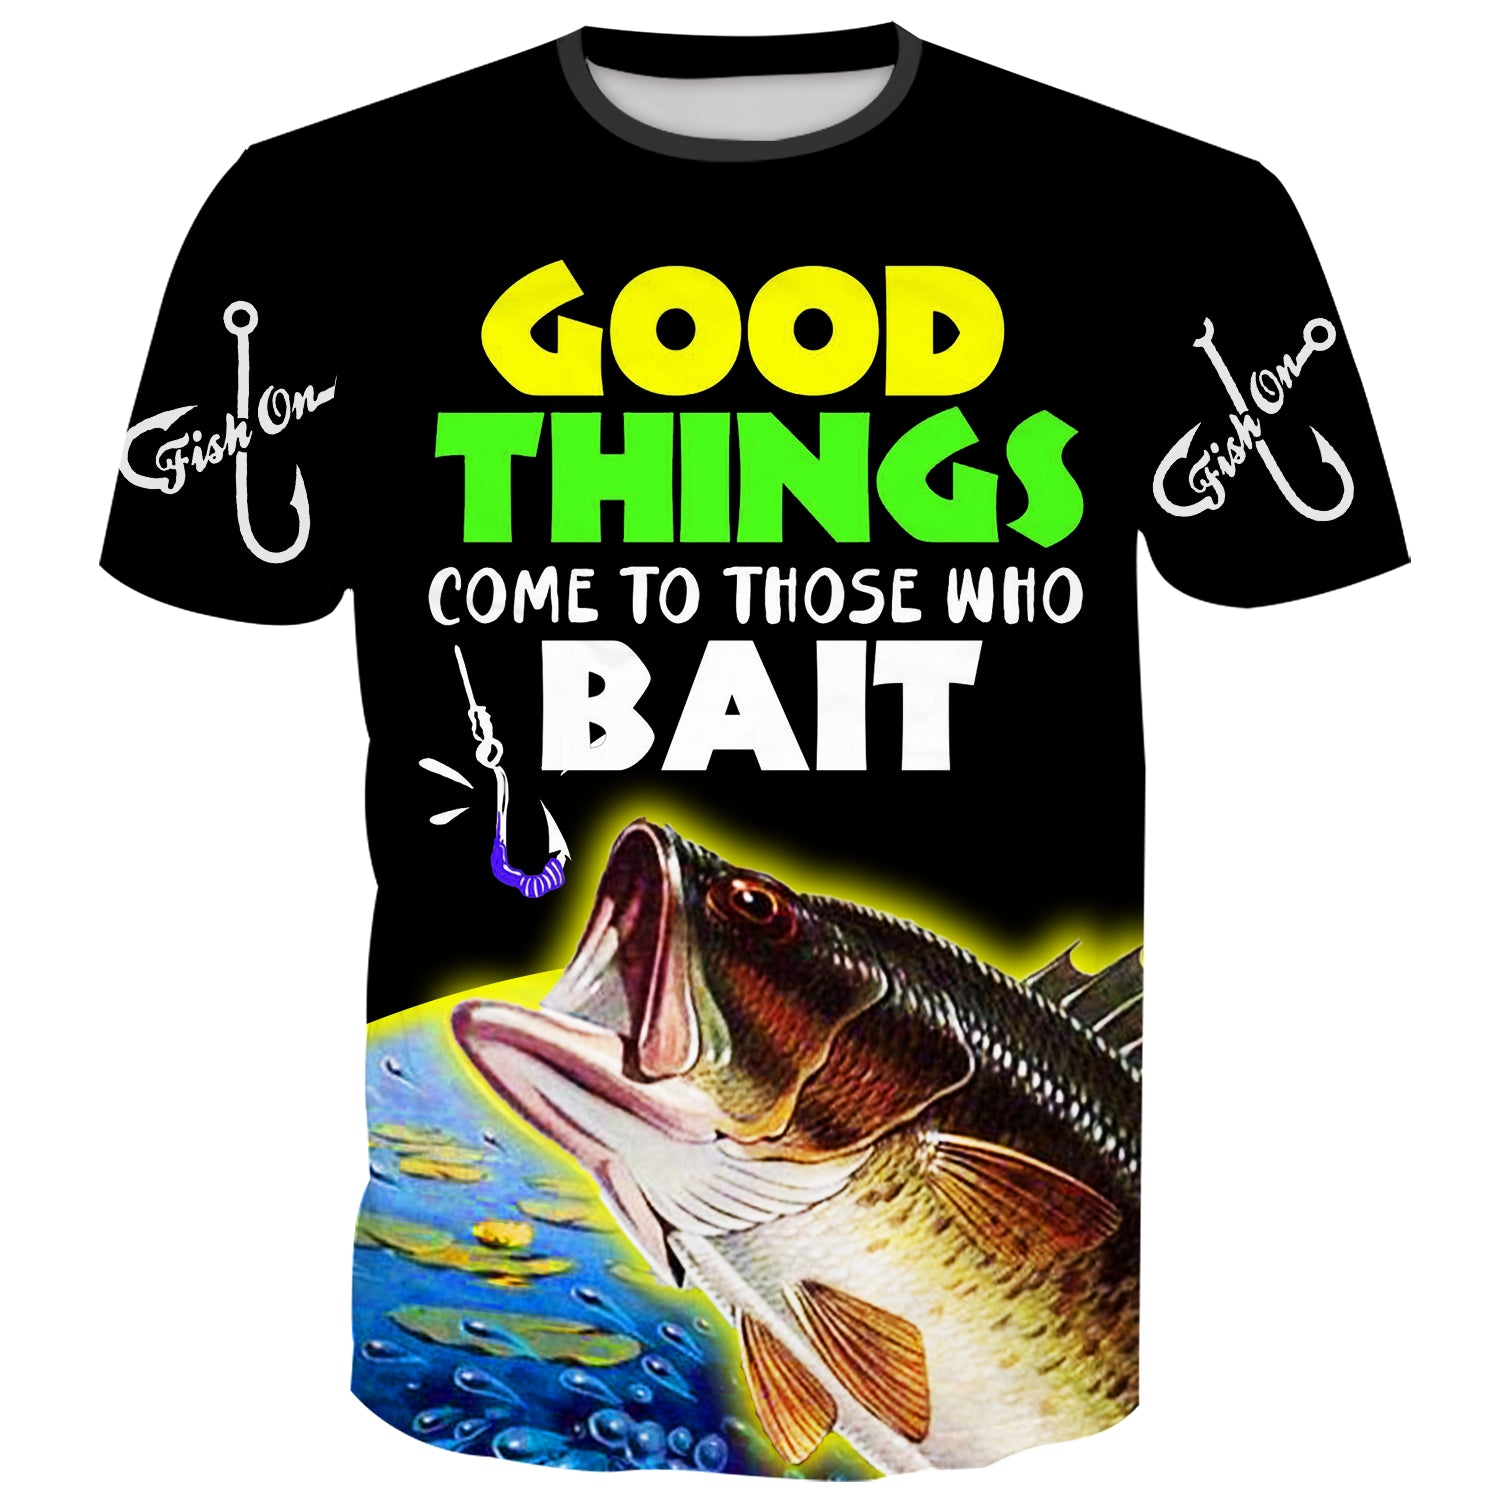 Good things come to those who bait - Fishing T-Shirt